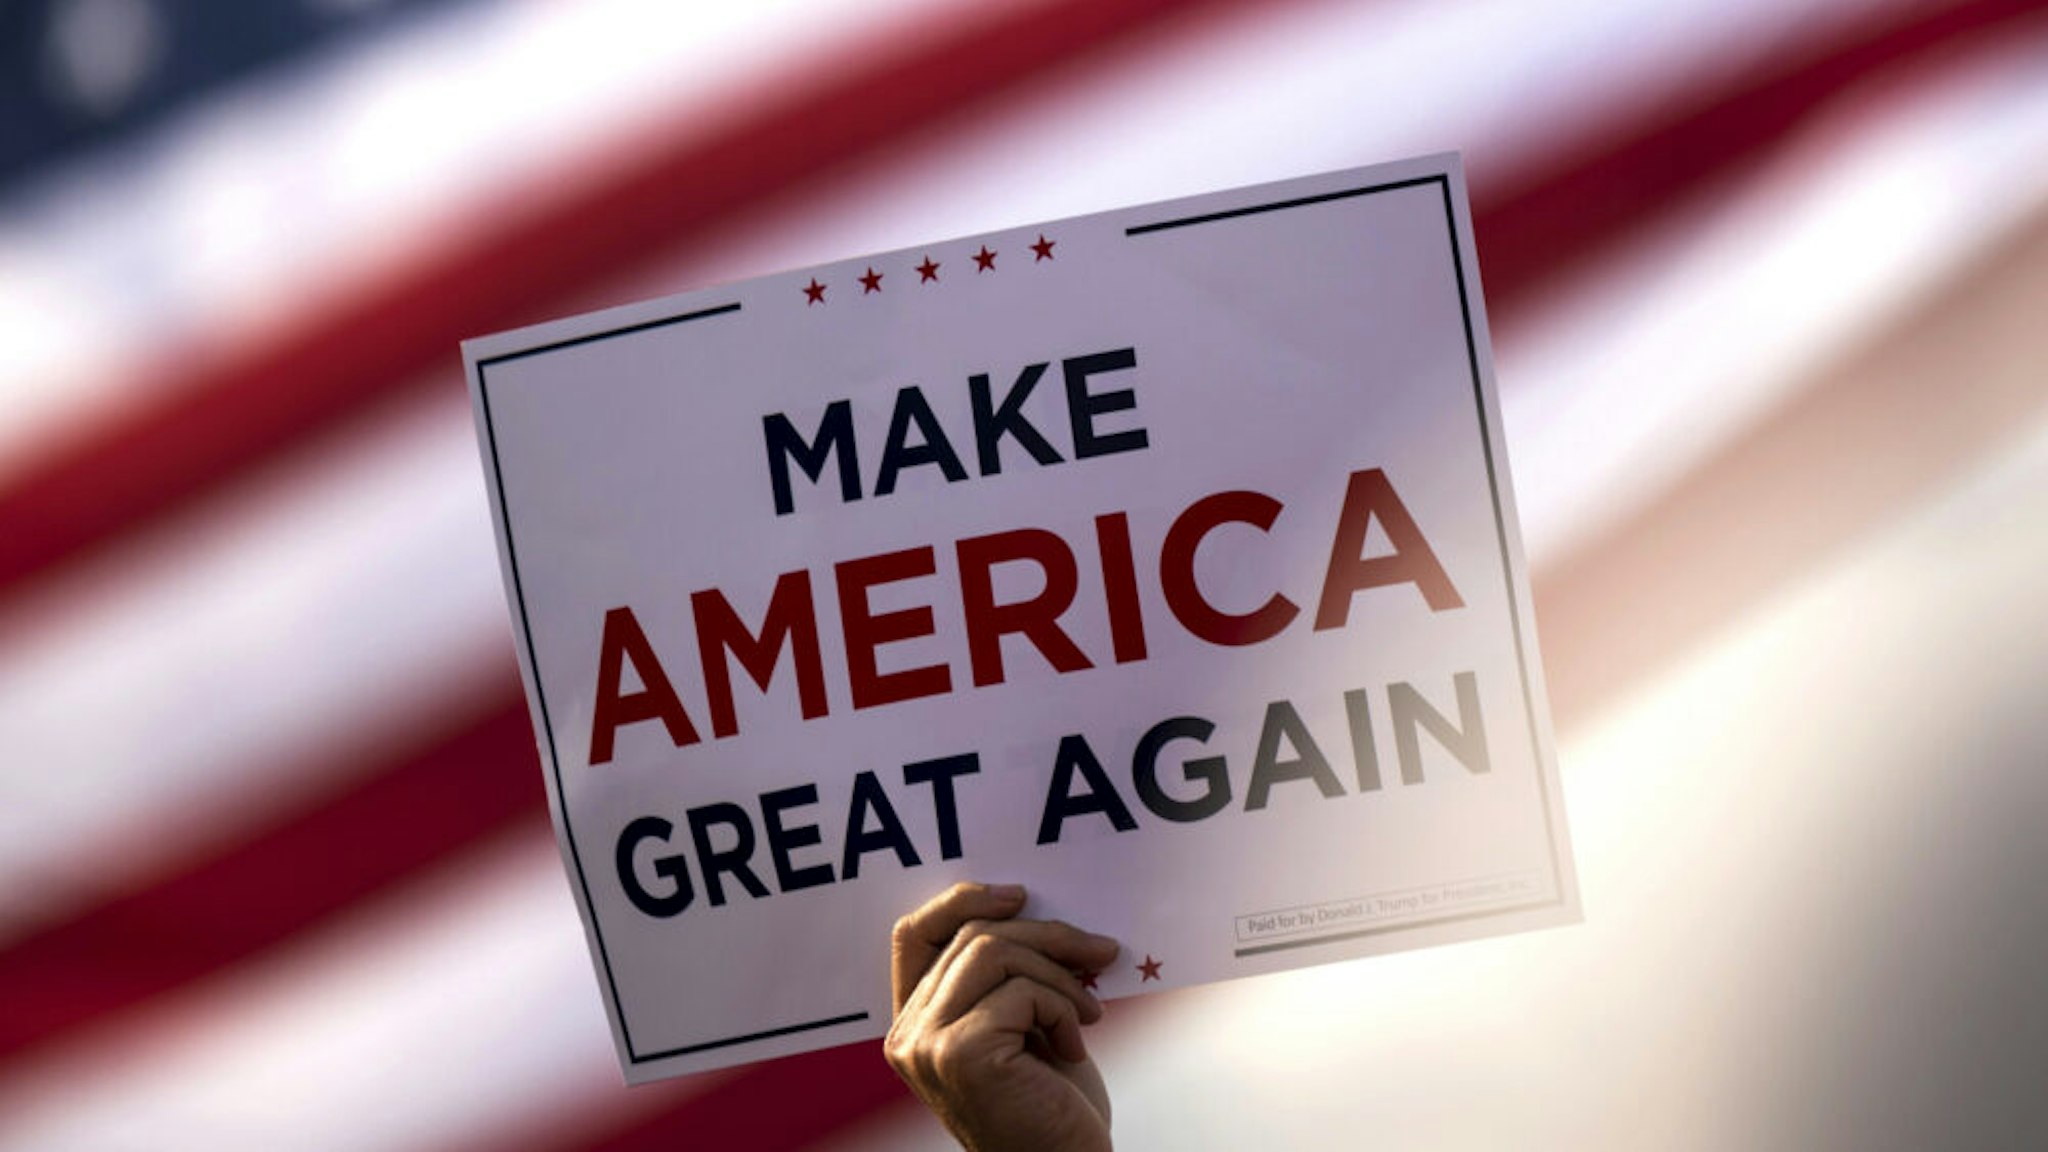 BEMIDJI, MN - SEPTEMBER 18: A man waves a "Make America Great Again" sign before President Donald Trump arrives for a rally at the Bemidji Regional Airport on September 18, 2020 in Bemidji, Minnesota. Trump and challenger, Democratic presidential nominee and former Vice President Joe Biden, are both campaigning in Minnesota today.